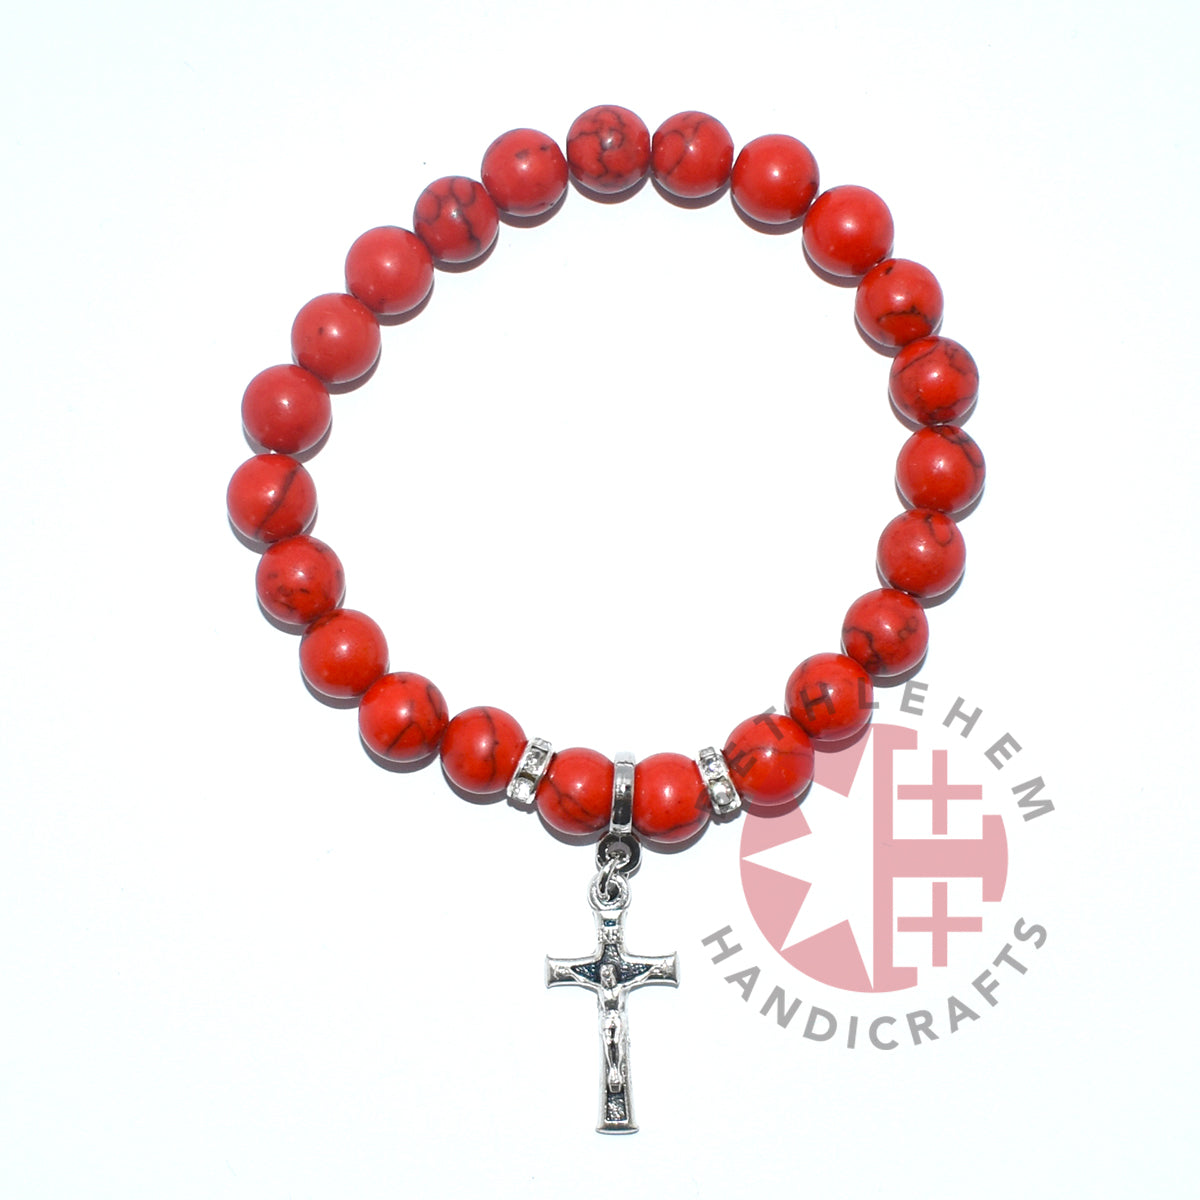 Coral Stone Bracelet Rosary, 8mm Beads with Silver Plated Cross